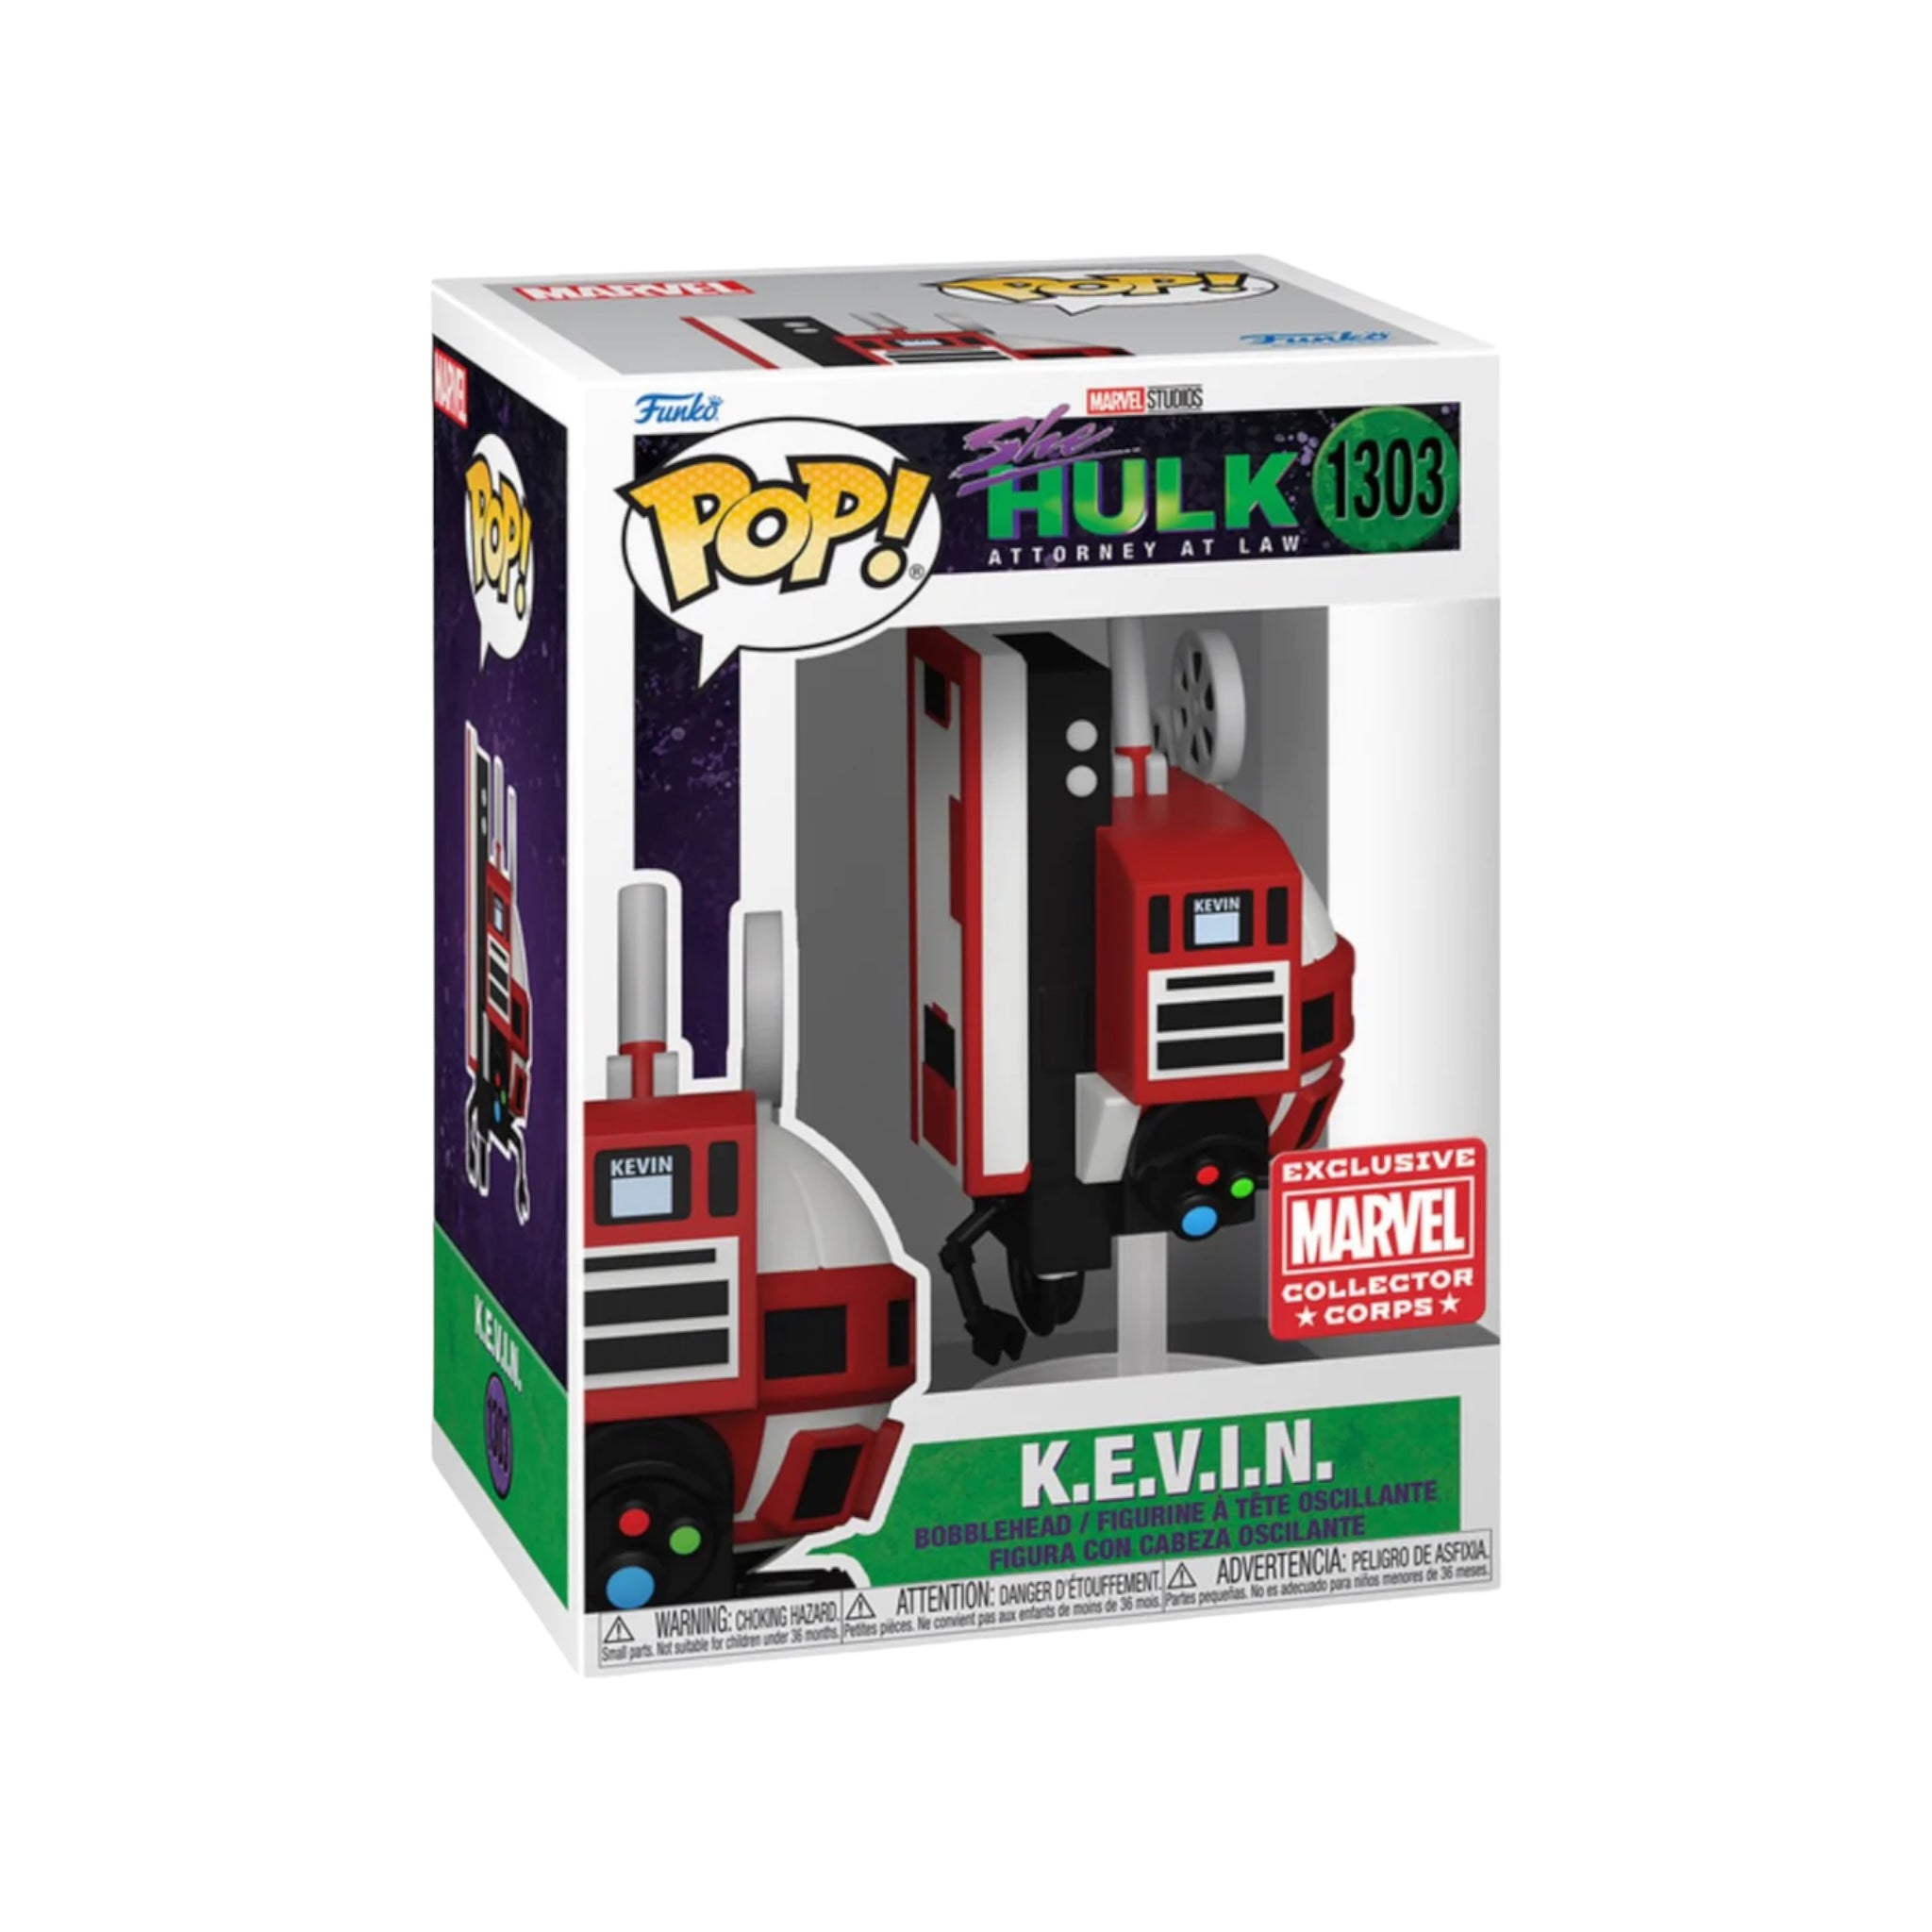 K.E.V.I.N #1303 Funko Pop! - She-Hulk: Attorney at Law - Marvel Collector Corps Exclusive